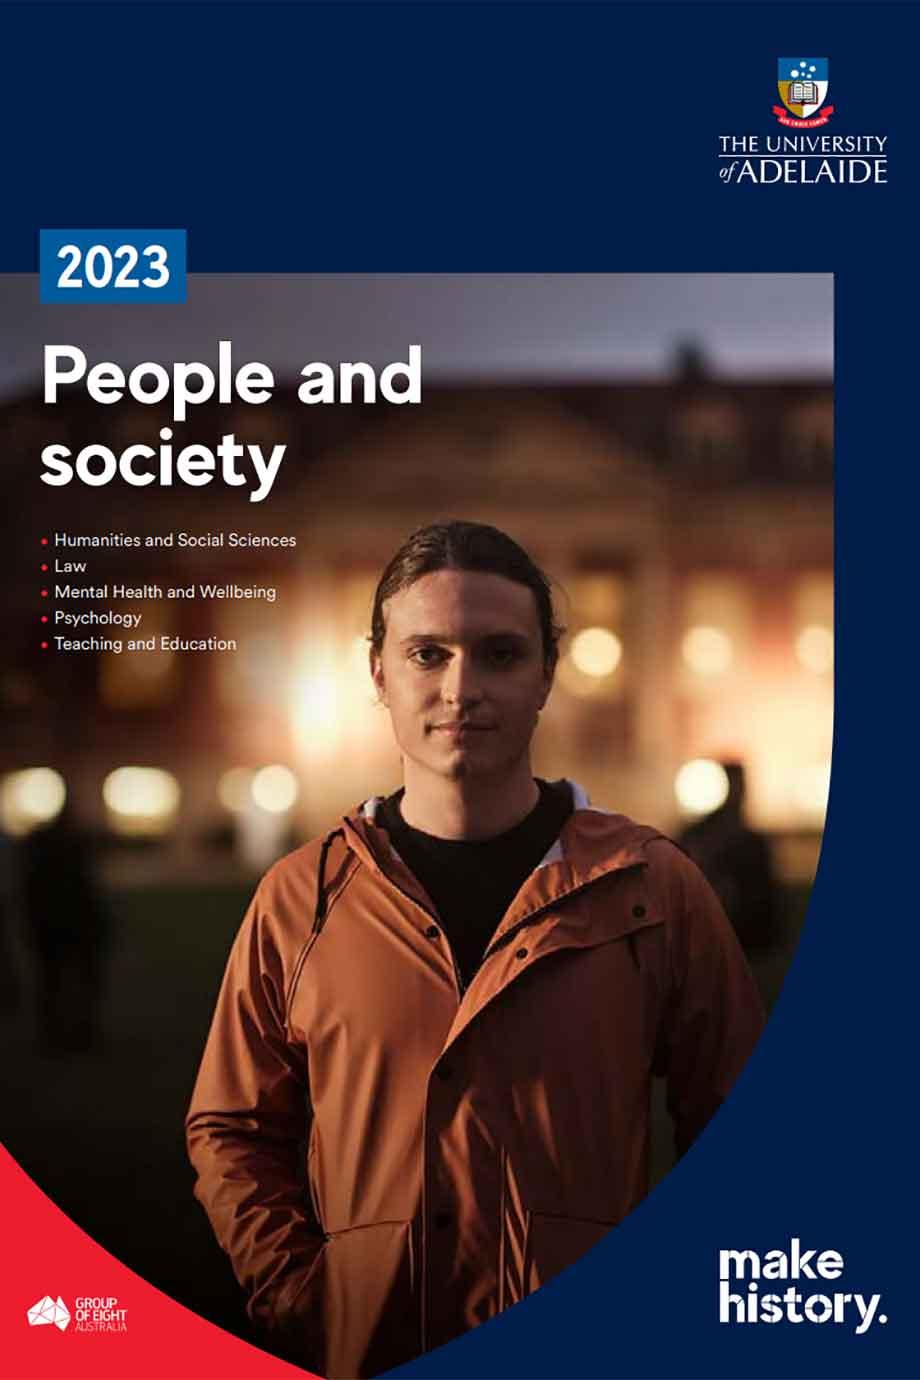 2023 People and society program guide